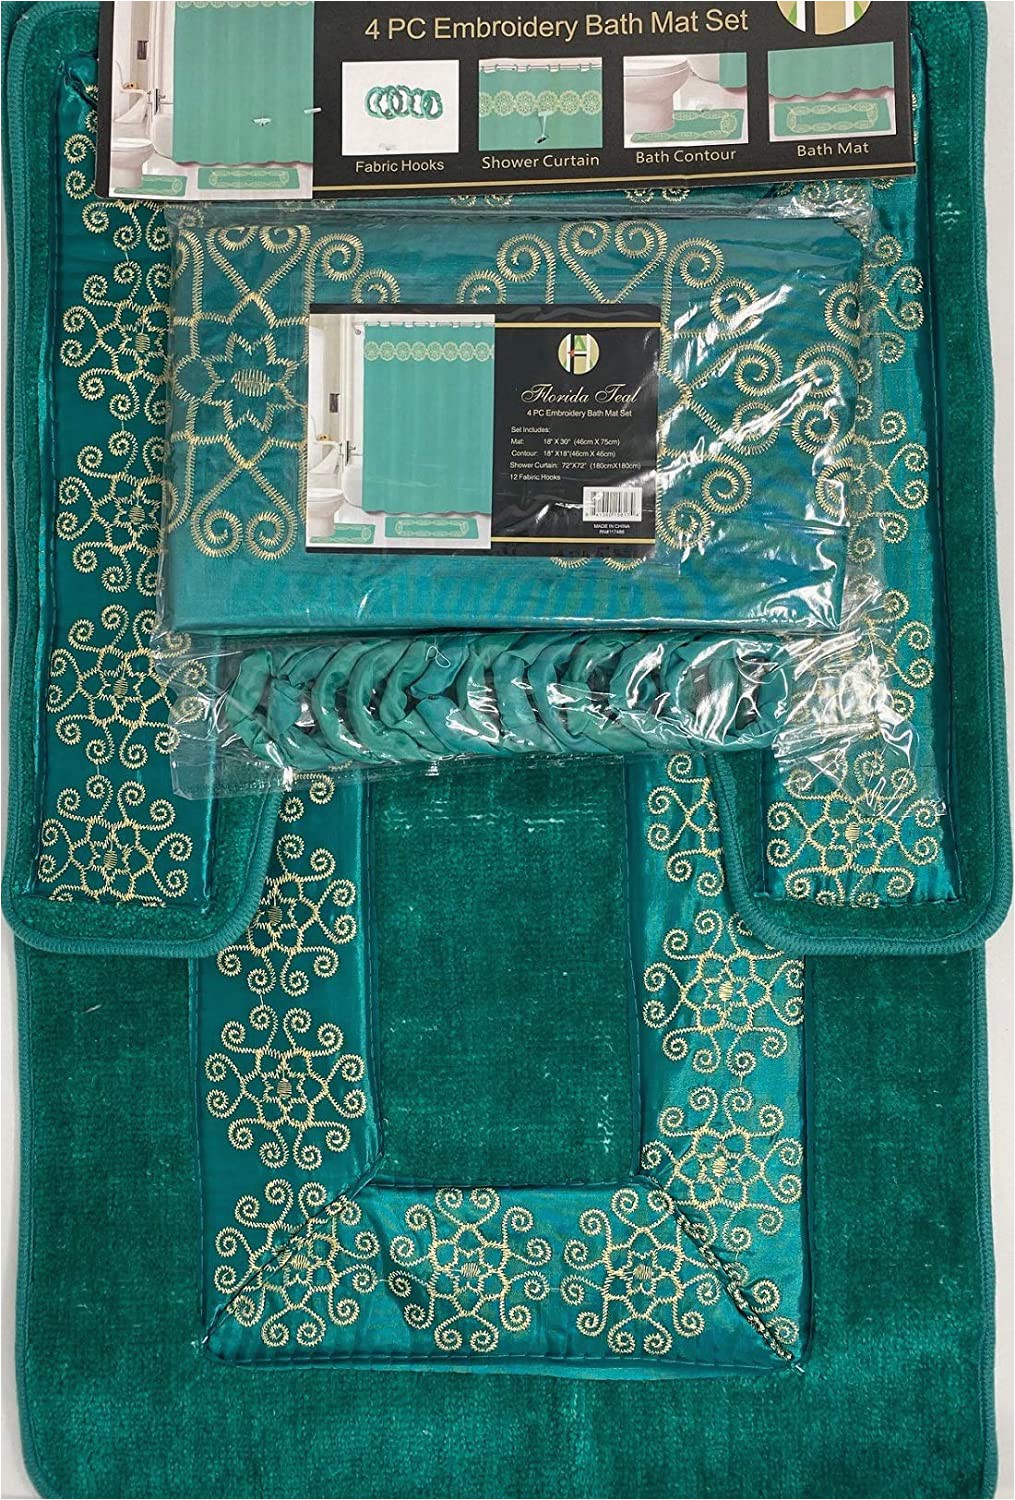 Gold Color Bath Rugs 4 Piece Bathroom Rugs Set Non Slip Teal Gold Bath Rug toilet Contour Mat with Fabric Shower Curtain and Matching Rings Florida Teal